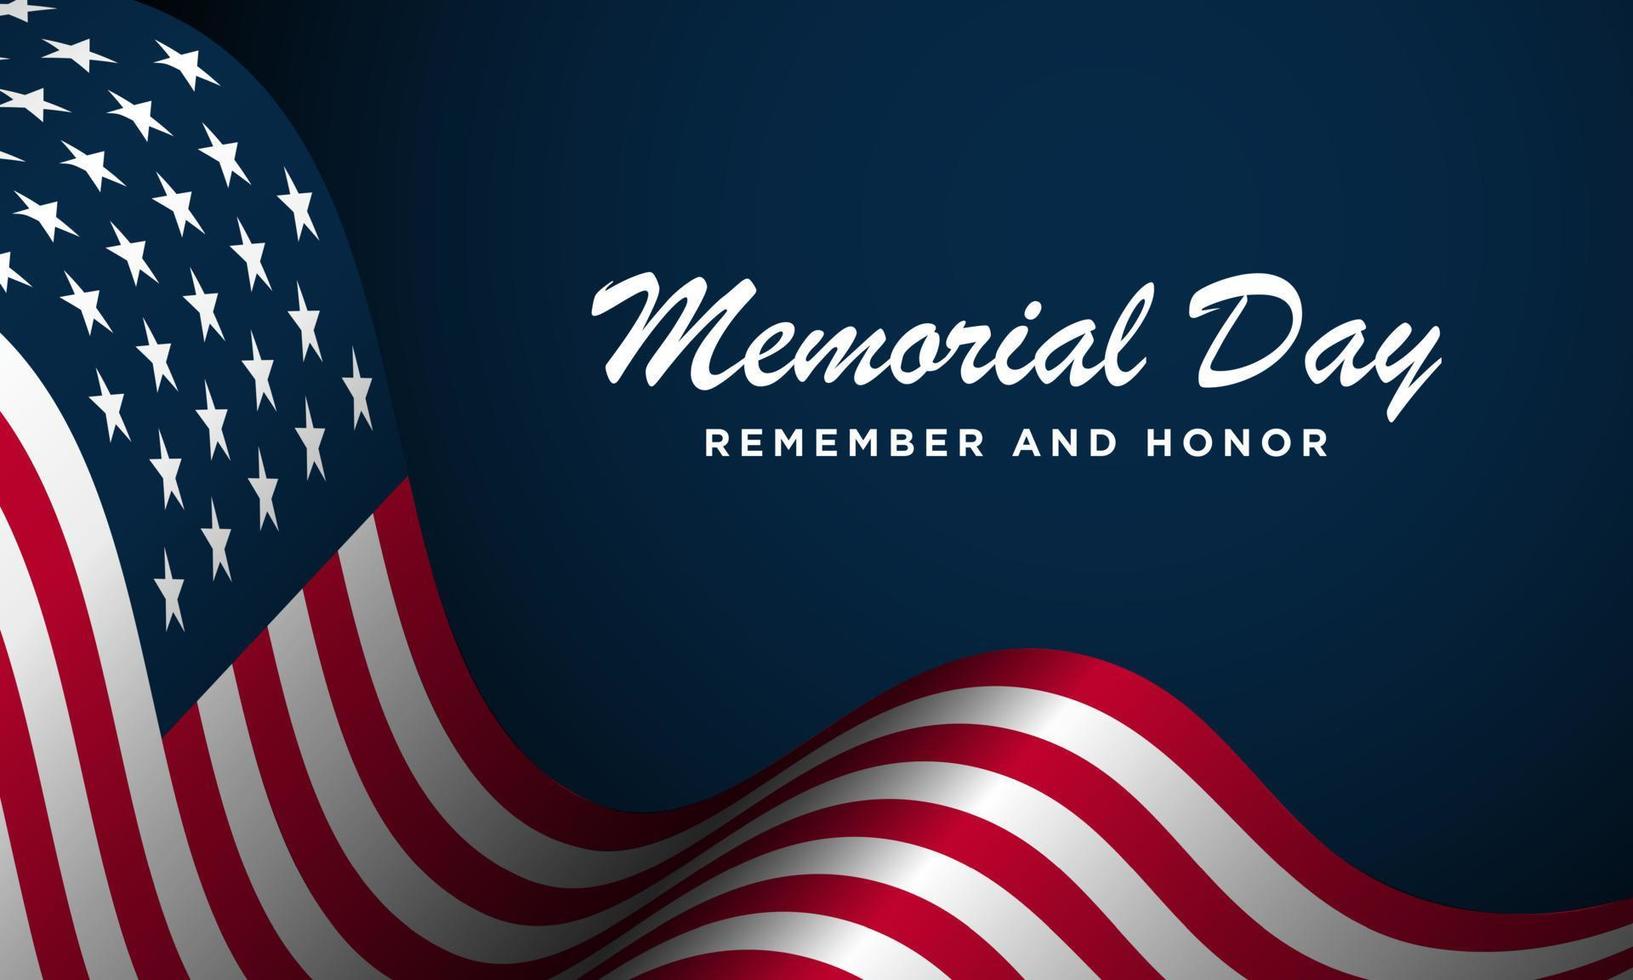 Memorial Day Background Design. Remember and Honor. Banner Design. USA flag on blue background. vector